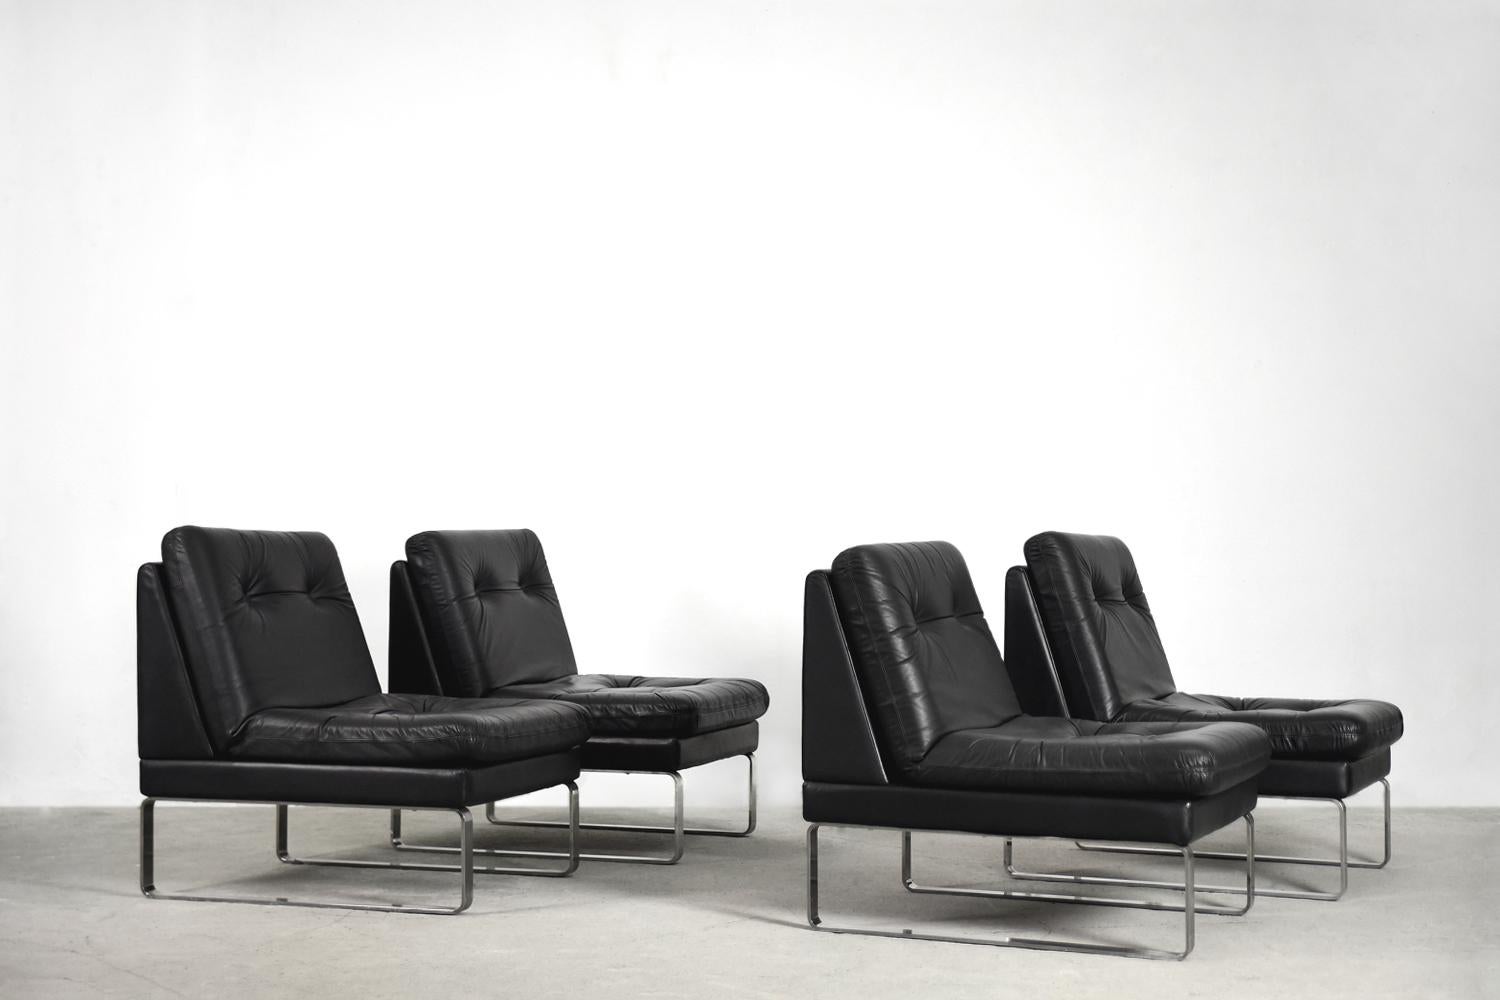 This modular sofa was produced by Klöber, a German manufactory founded in 1935. It consists of four separate lounge chairs in black leather. The minimalist base is made from chrome-plated steel. Klöber is an internationally operative manufacturer of